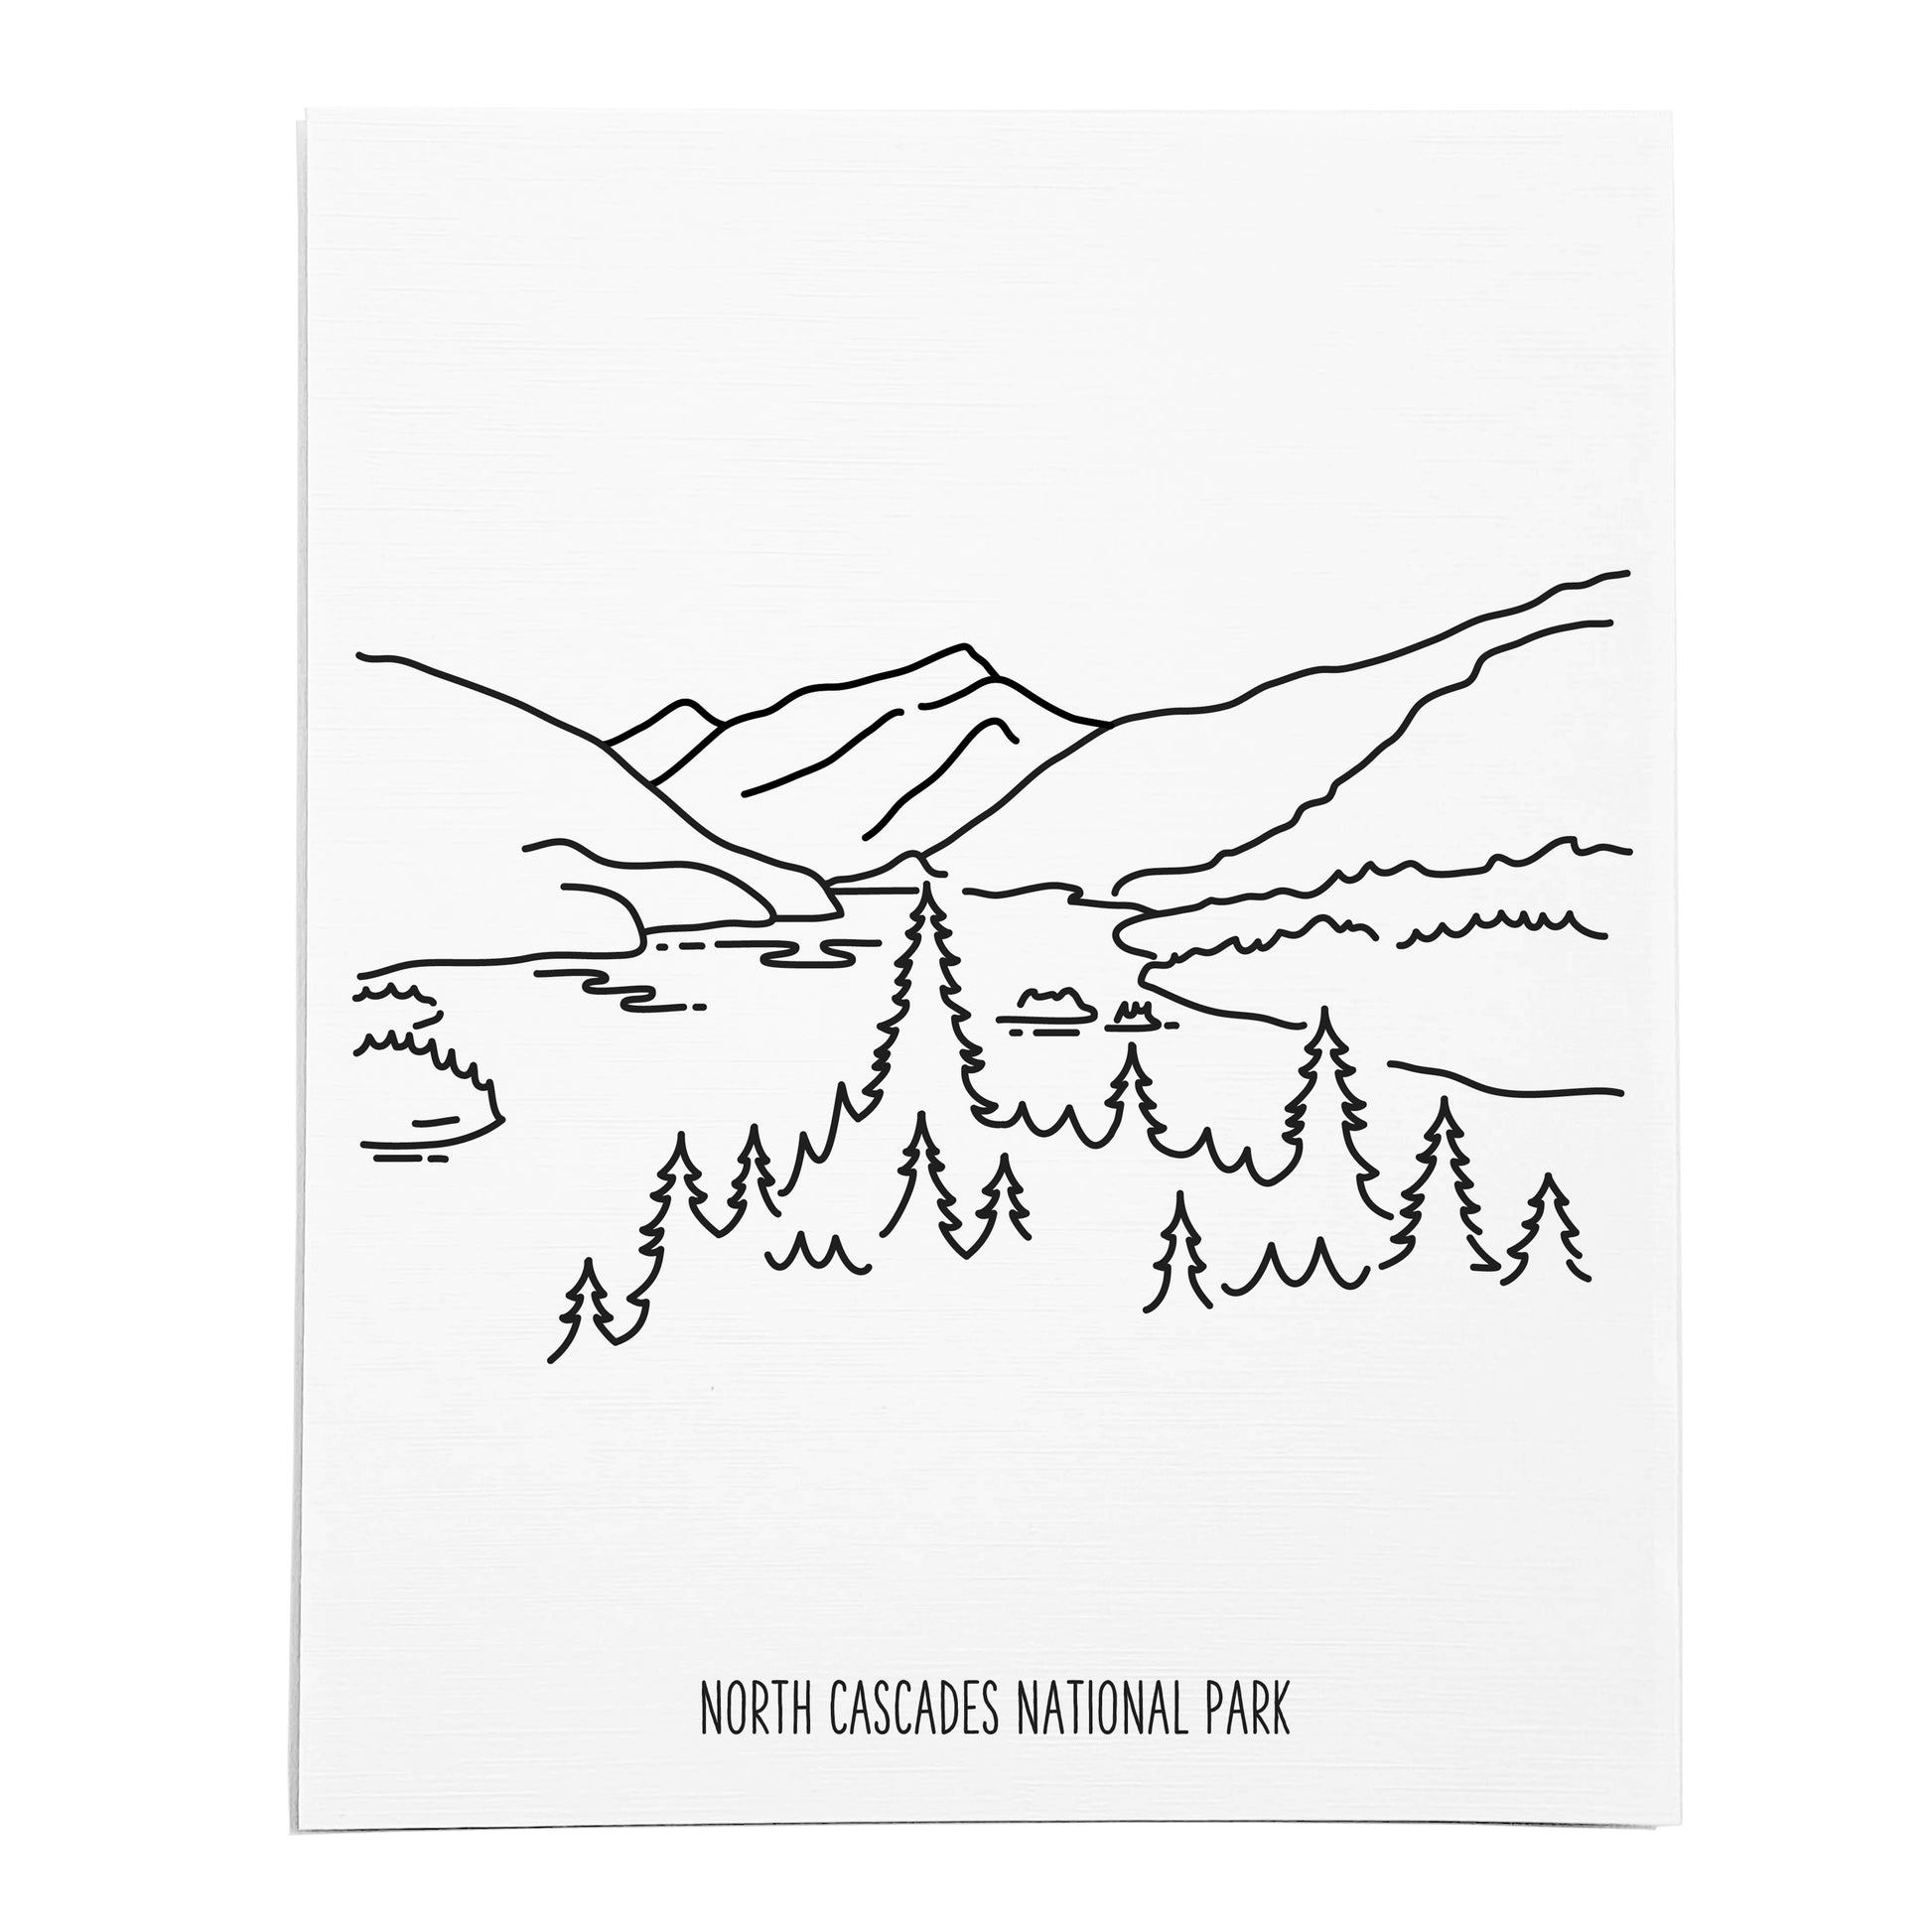 An art print featuring a line drawing of North Cascades National Park on white linen paper